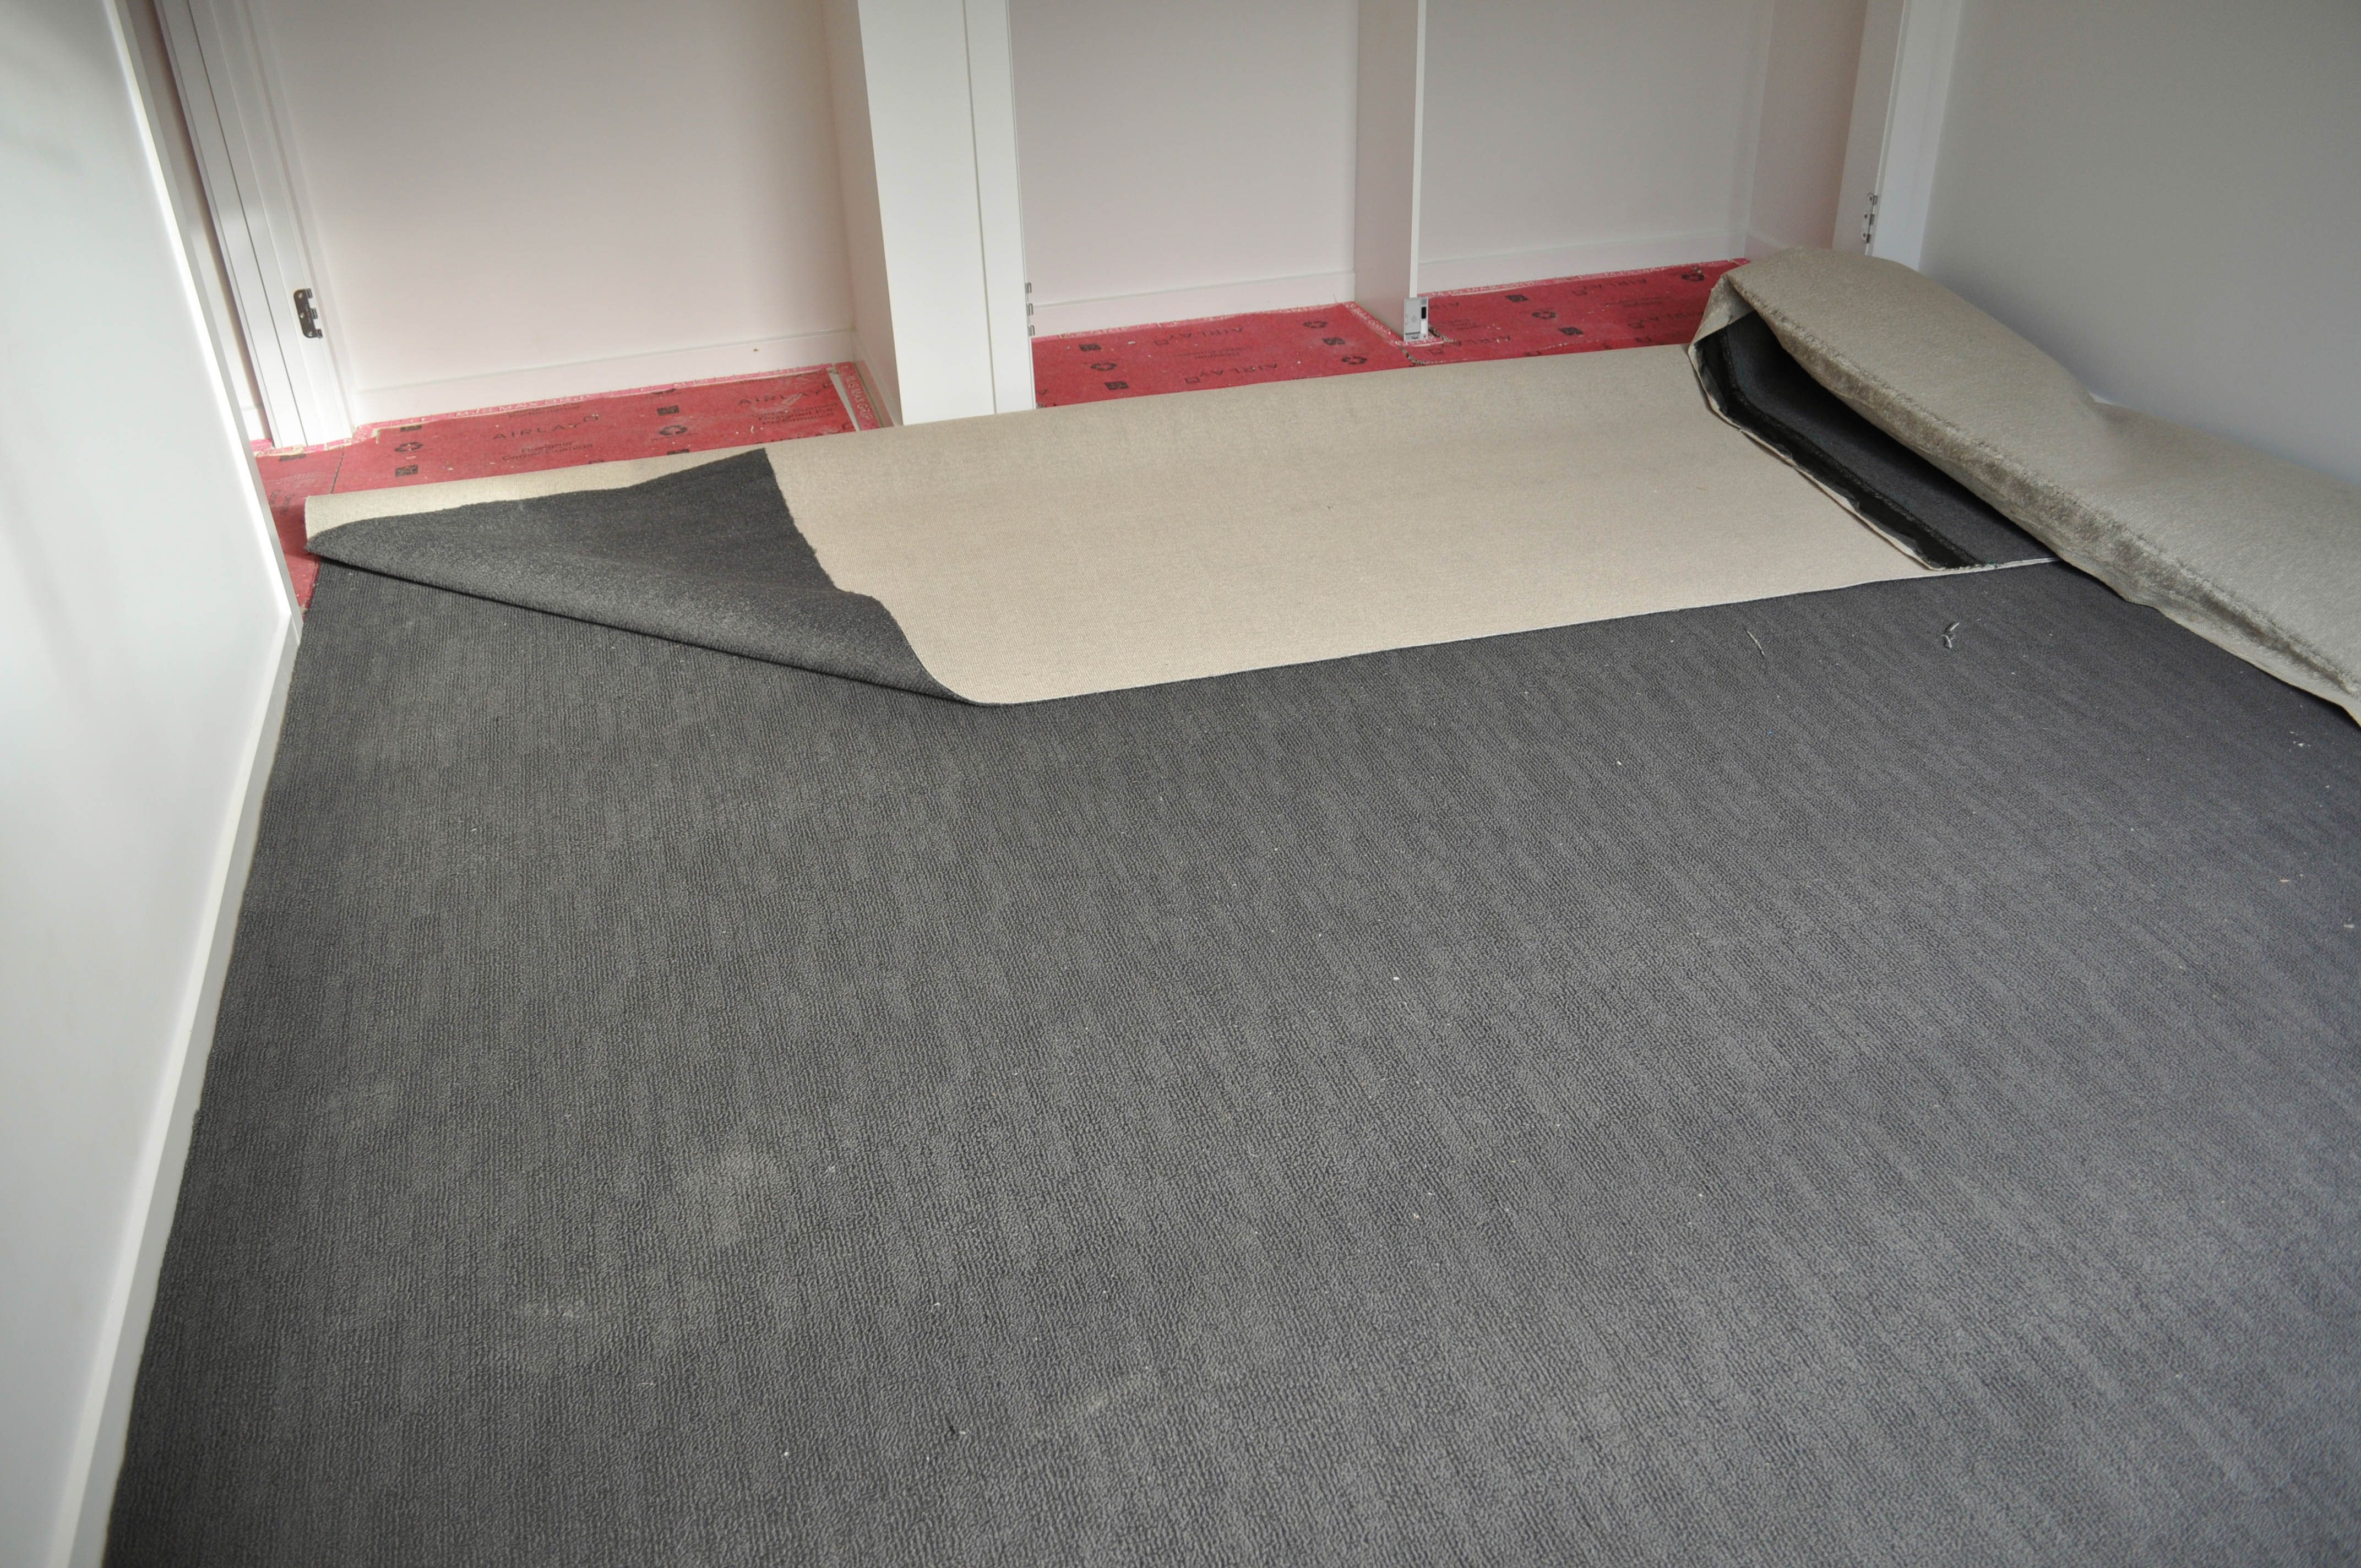 carpet laying process under way by Concord Floors, showing a roll of carpet stretched out, on top of installed red underlay in a home in
 Werribee.